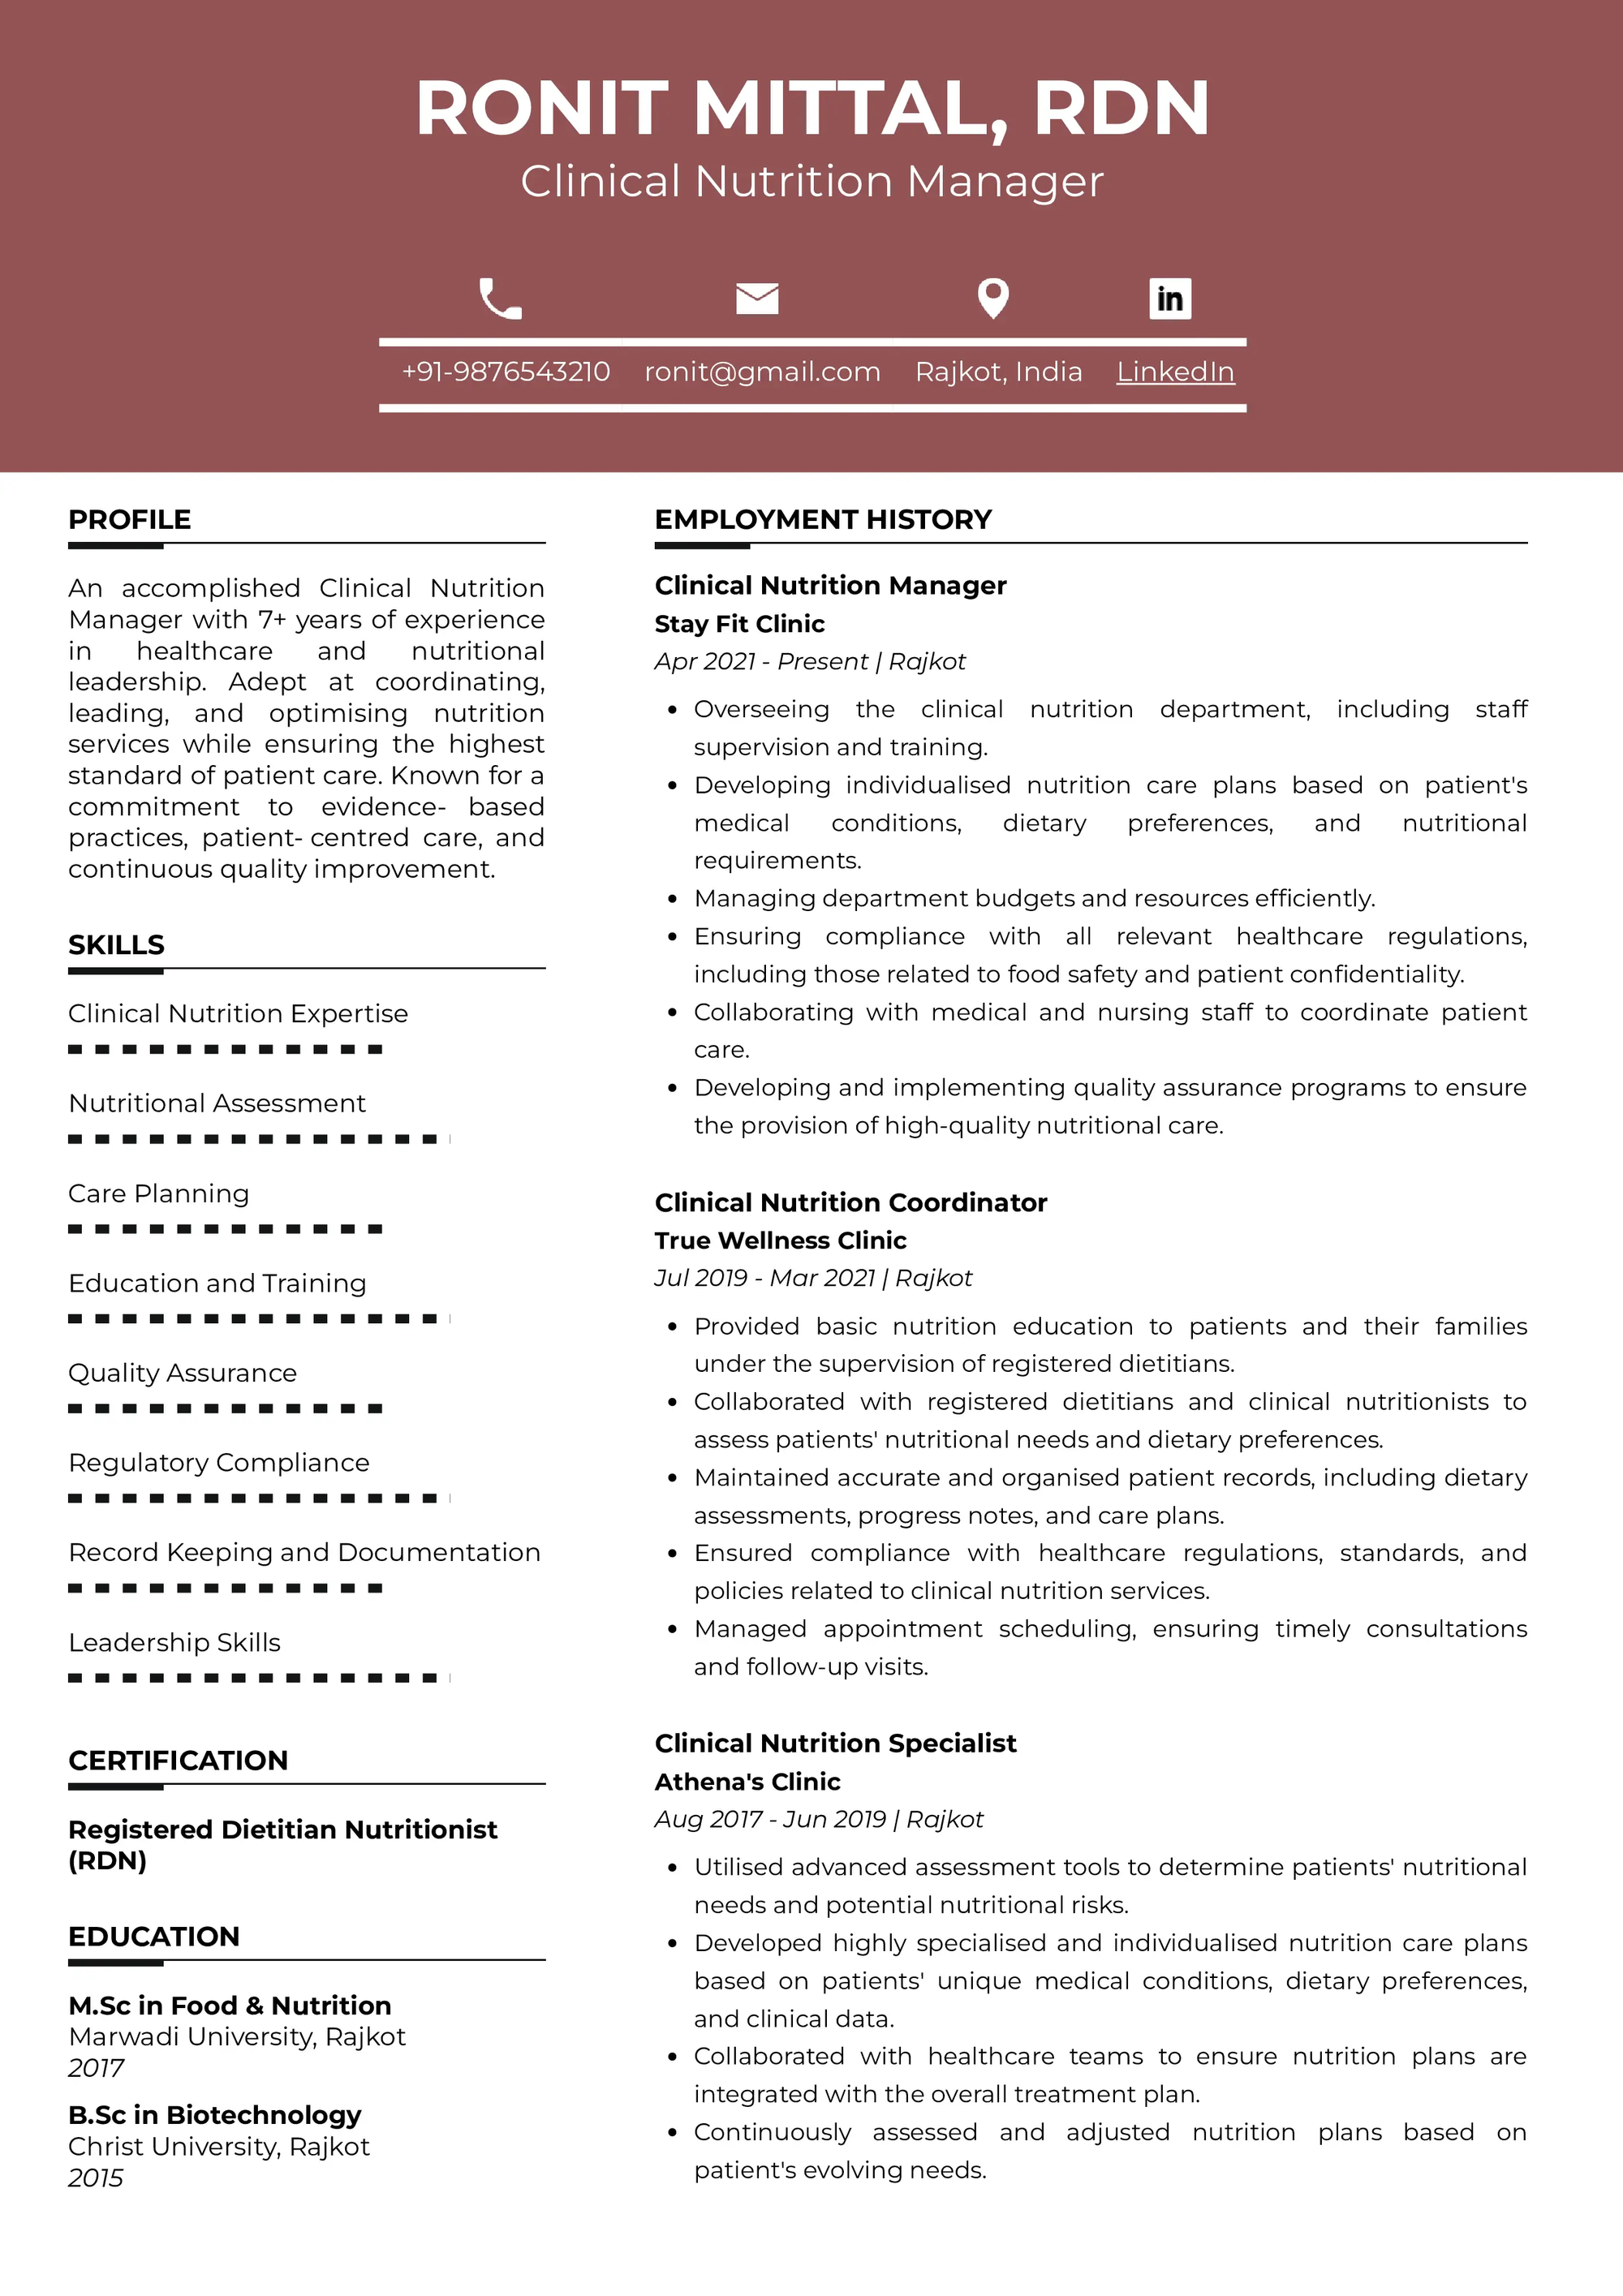 Resume of Clinical Nutrition Manager 